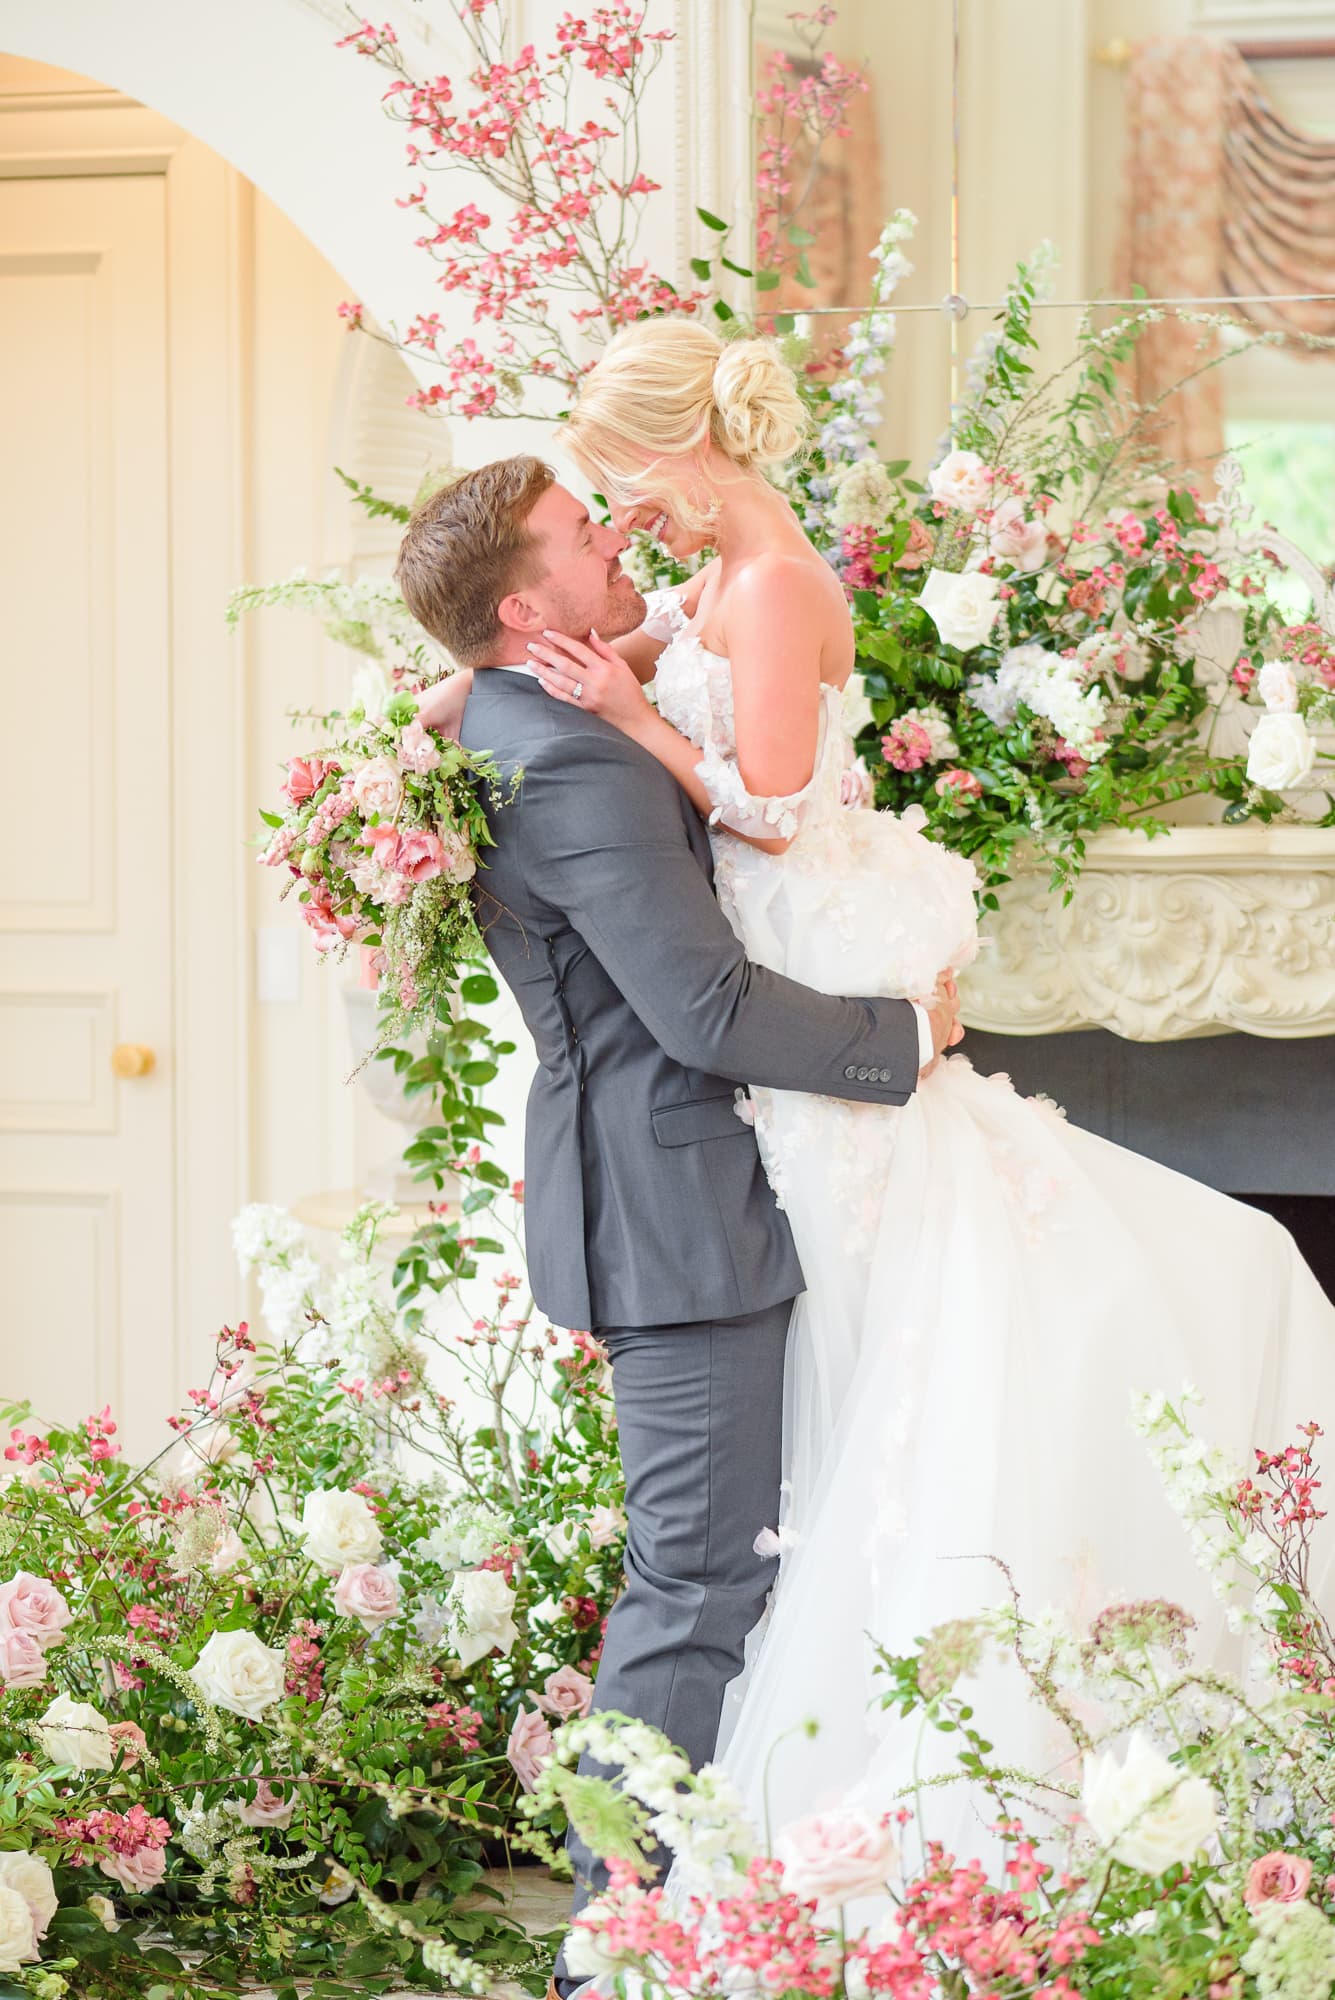 The groom picks his bride up and spins her around in the drawing room of this elegant mansion.